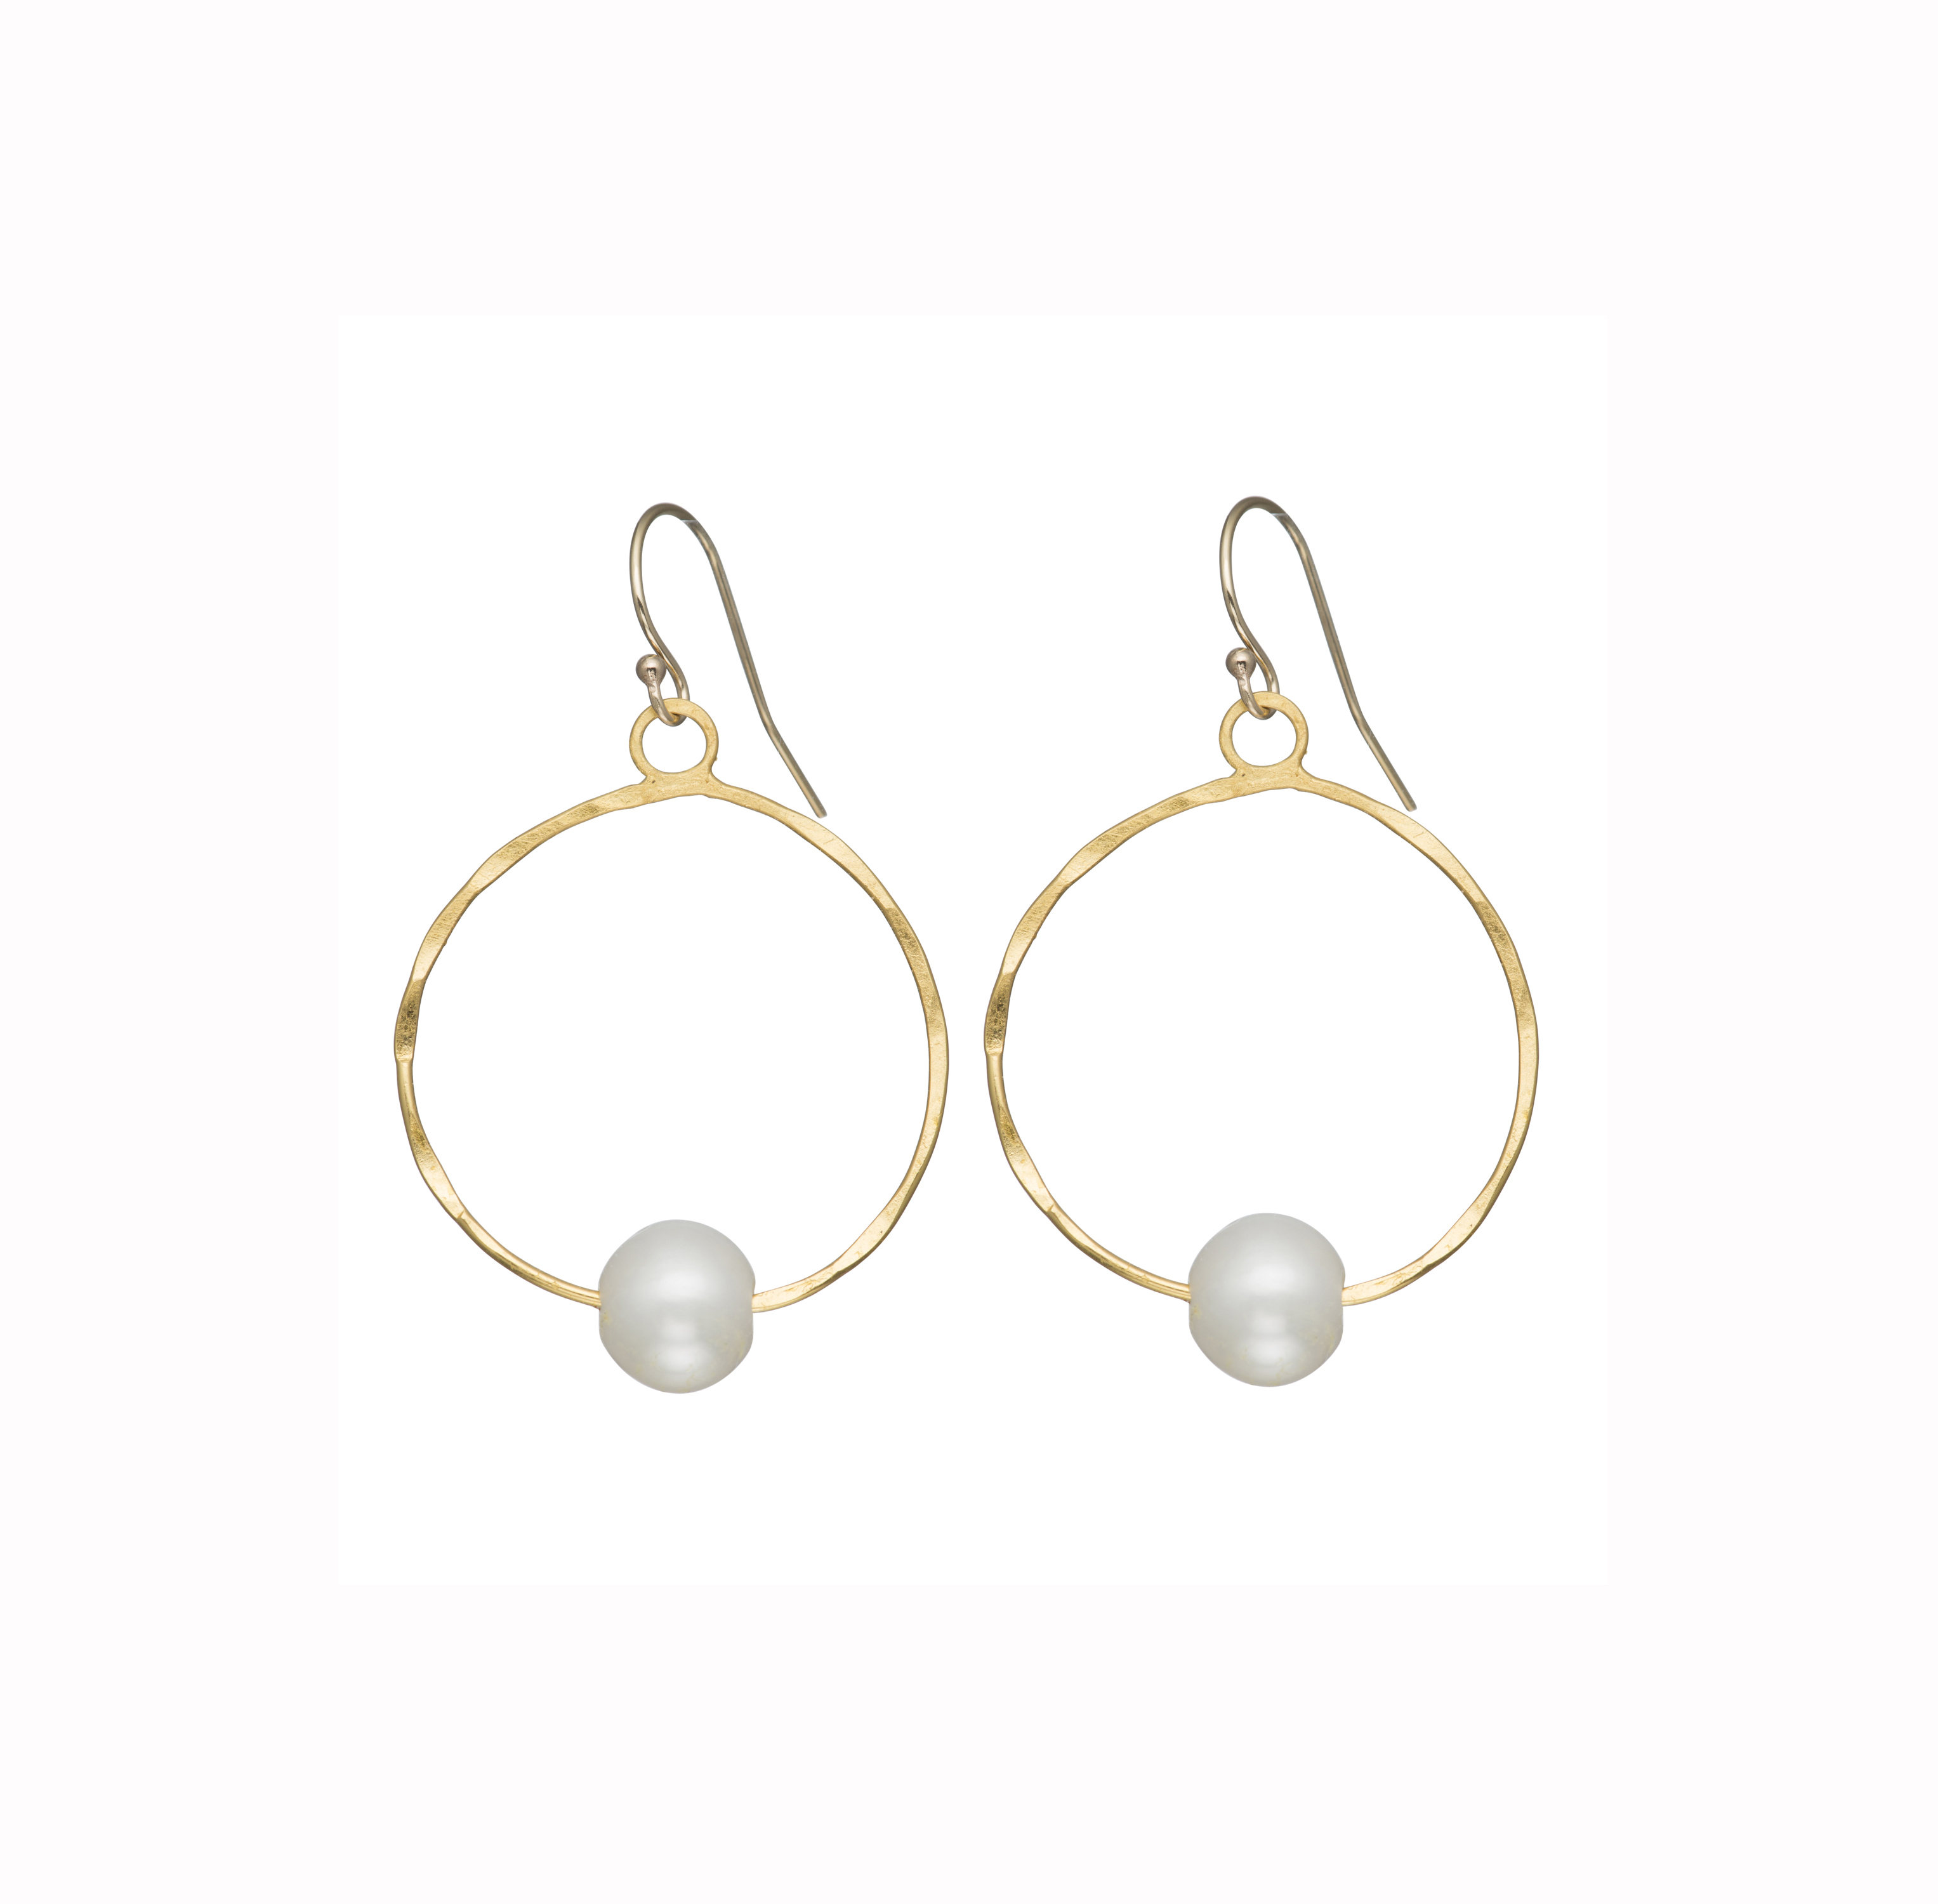 Gold Hoops with Baroque Pearls - Morra Designs